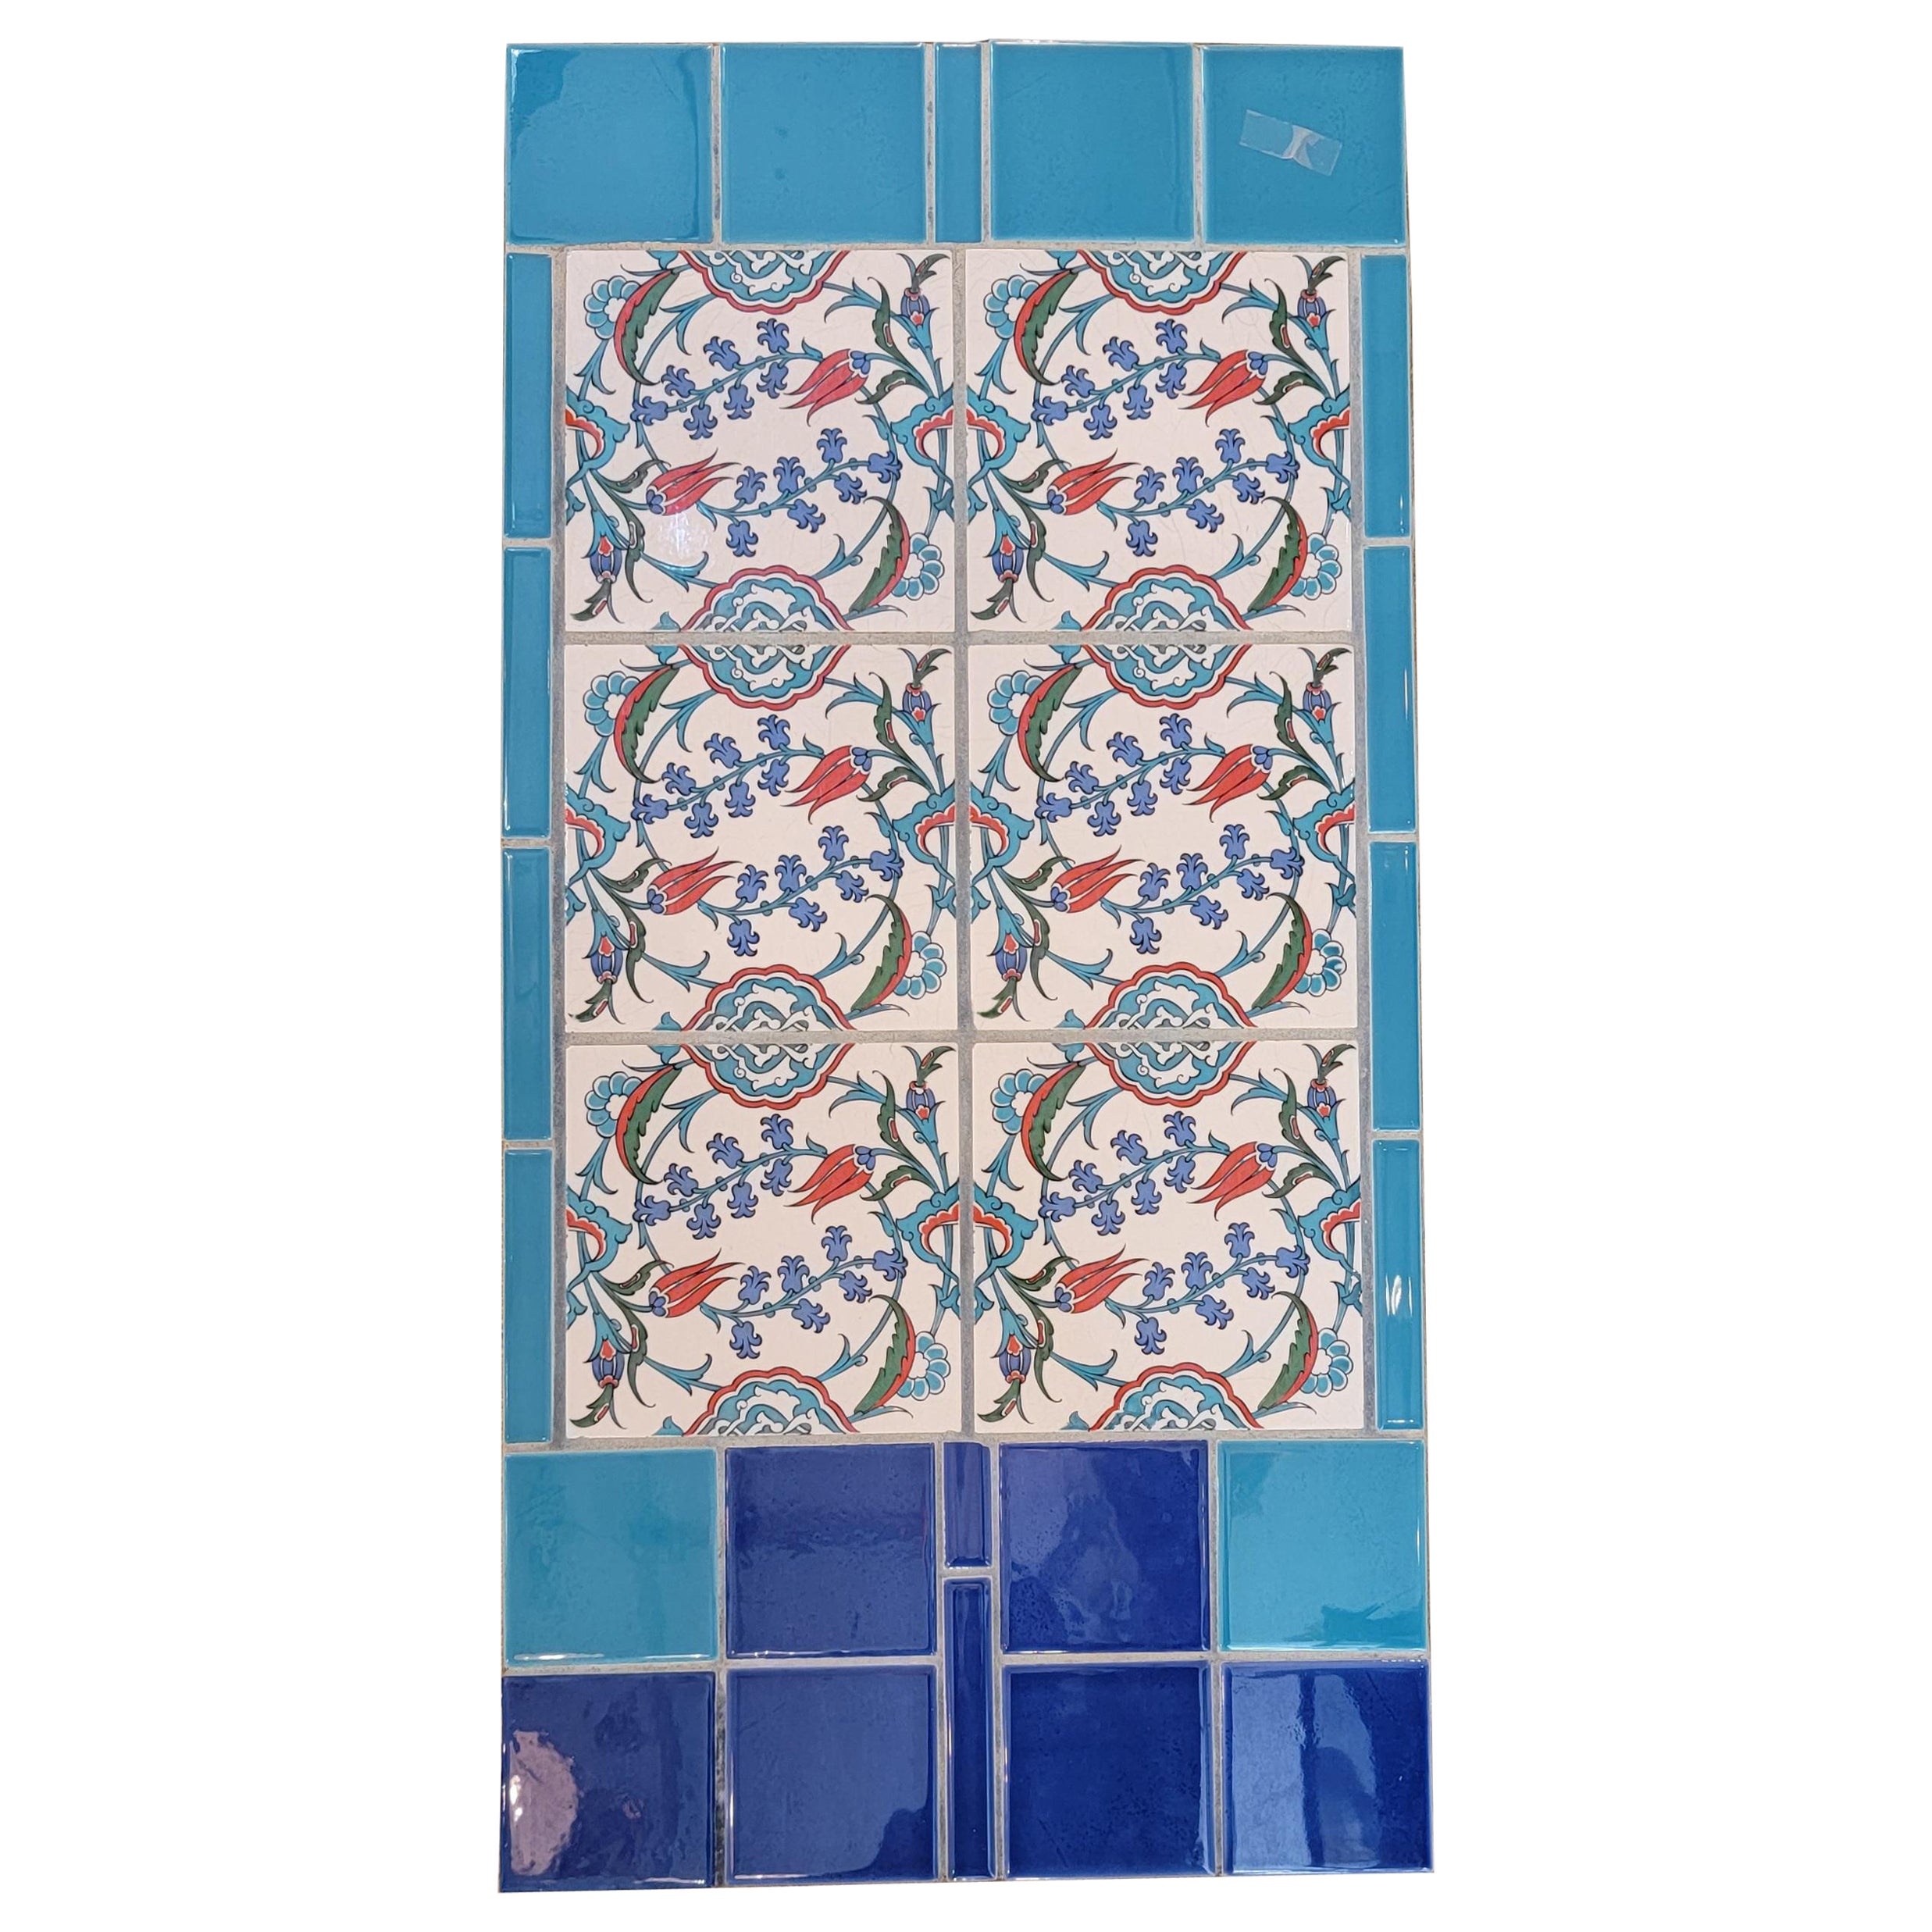 Italian Blue Border Floral Tile Wall Art or Table Top For Sale